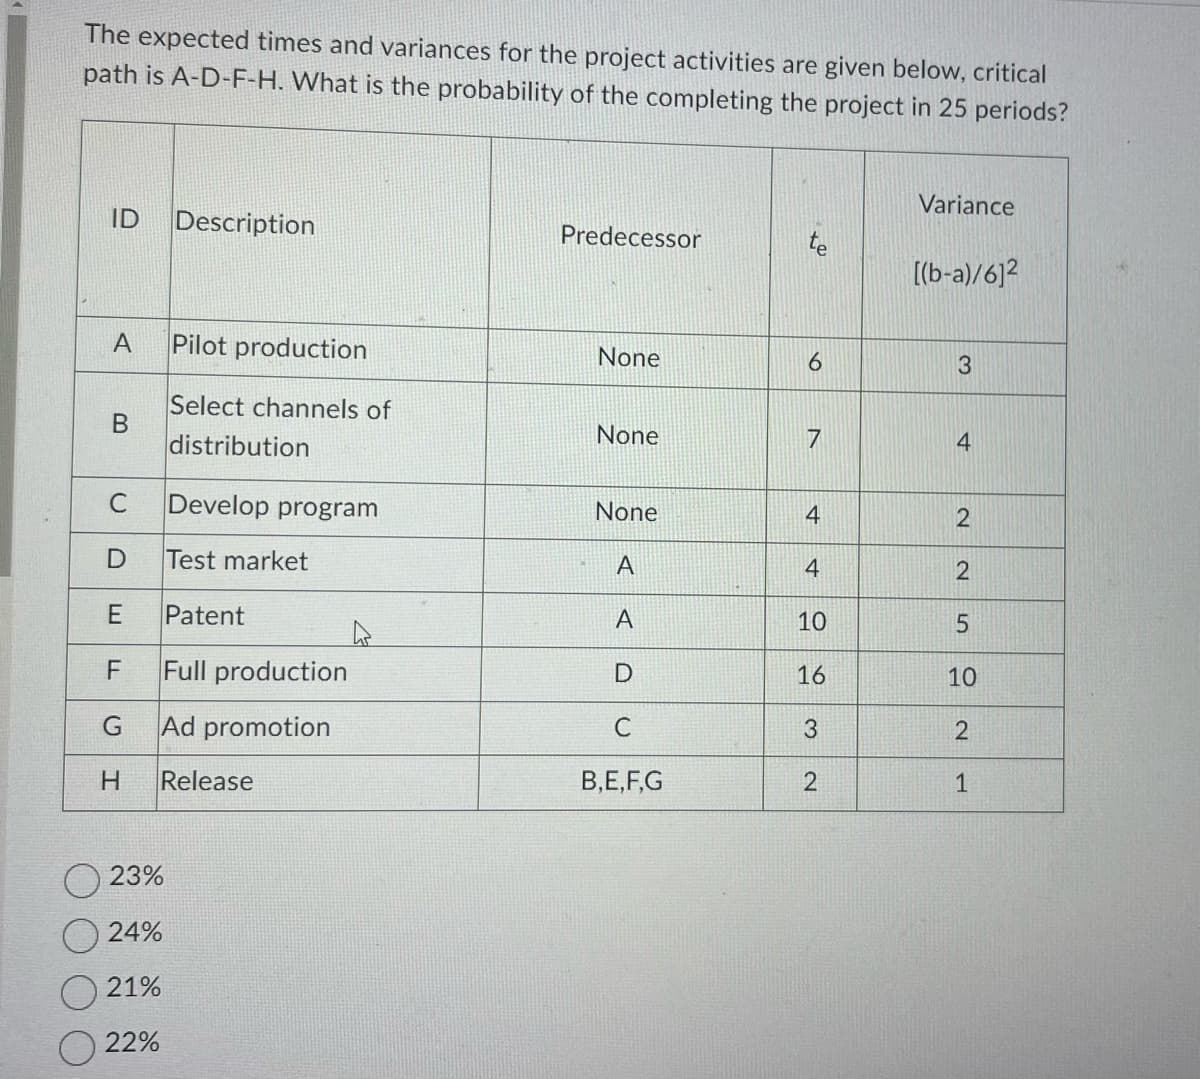 The expected times and variances for the project activities are given below, critical
path is A-D-F-H. What is the probability of the completing the project in 25 periods?
ID Description
A Pilot production
B
C Develop program
D
Test market
E
Patent
F
Full production
G
Ad promotion
H
Select channels of
distribution
Release
23%
24%
21%
22%
Predecessor
None
None
None
A
A
D
C
B,E,F,G
te
6
7
4
4
10
16
3
2
Variance
[(b-a)/6]2
3
4
2
2
5
10
2
1